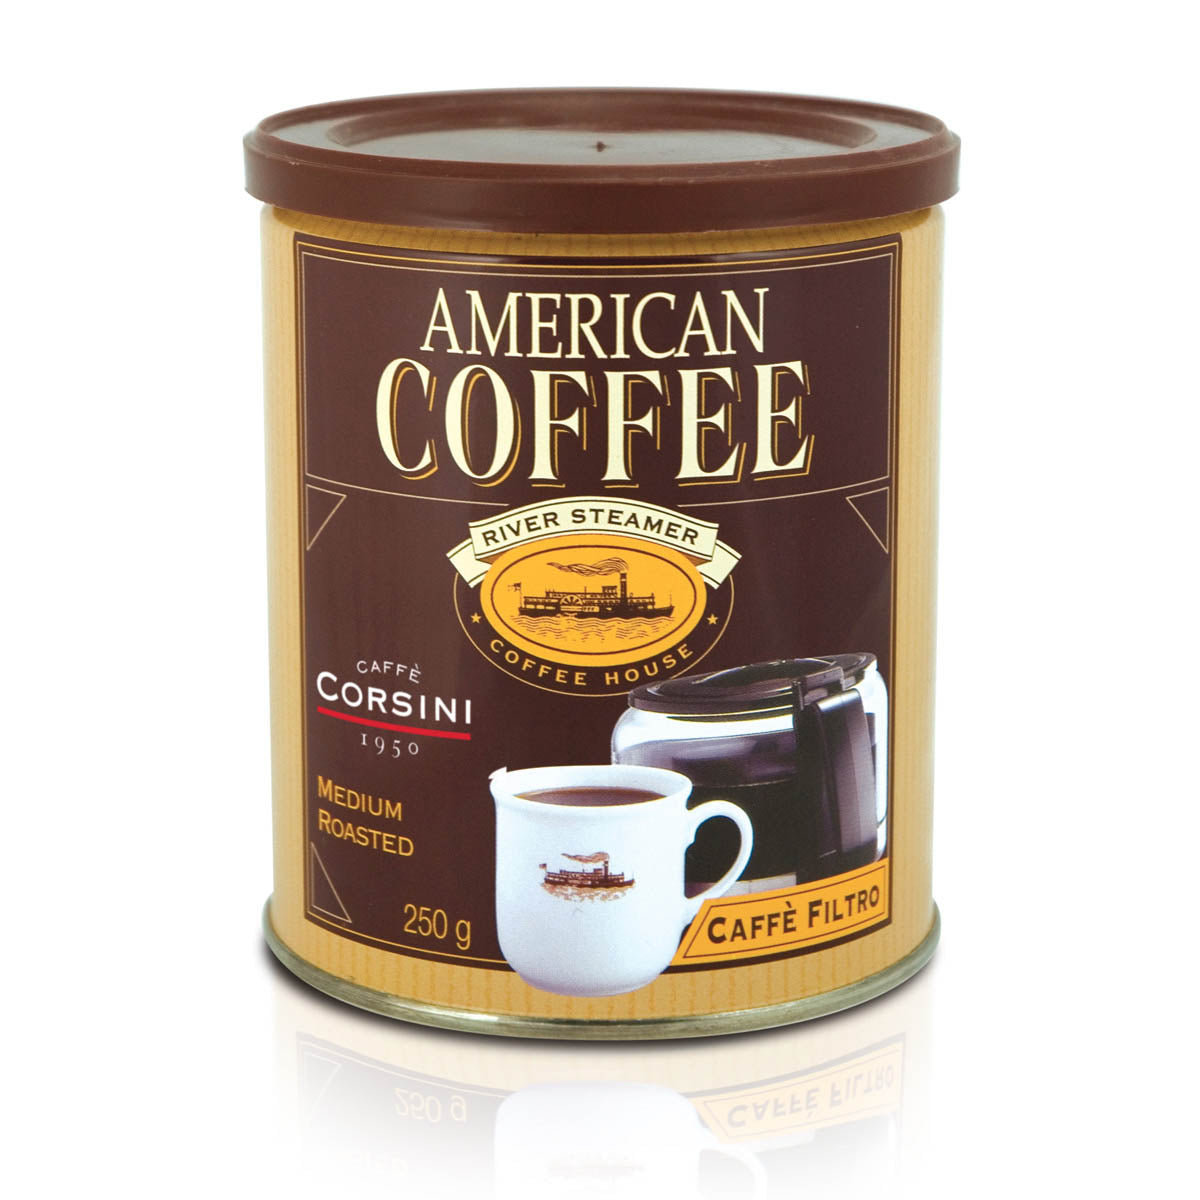 American Coffee | Filter ground coffee | Can of 250g | Box of 12 cans